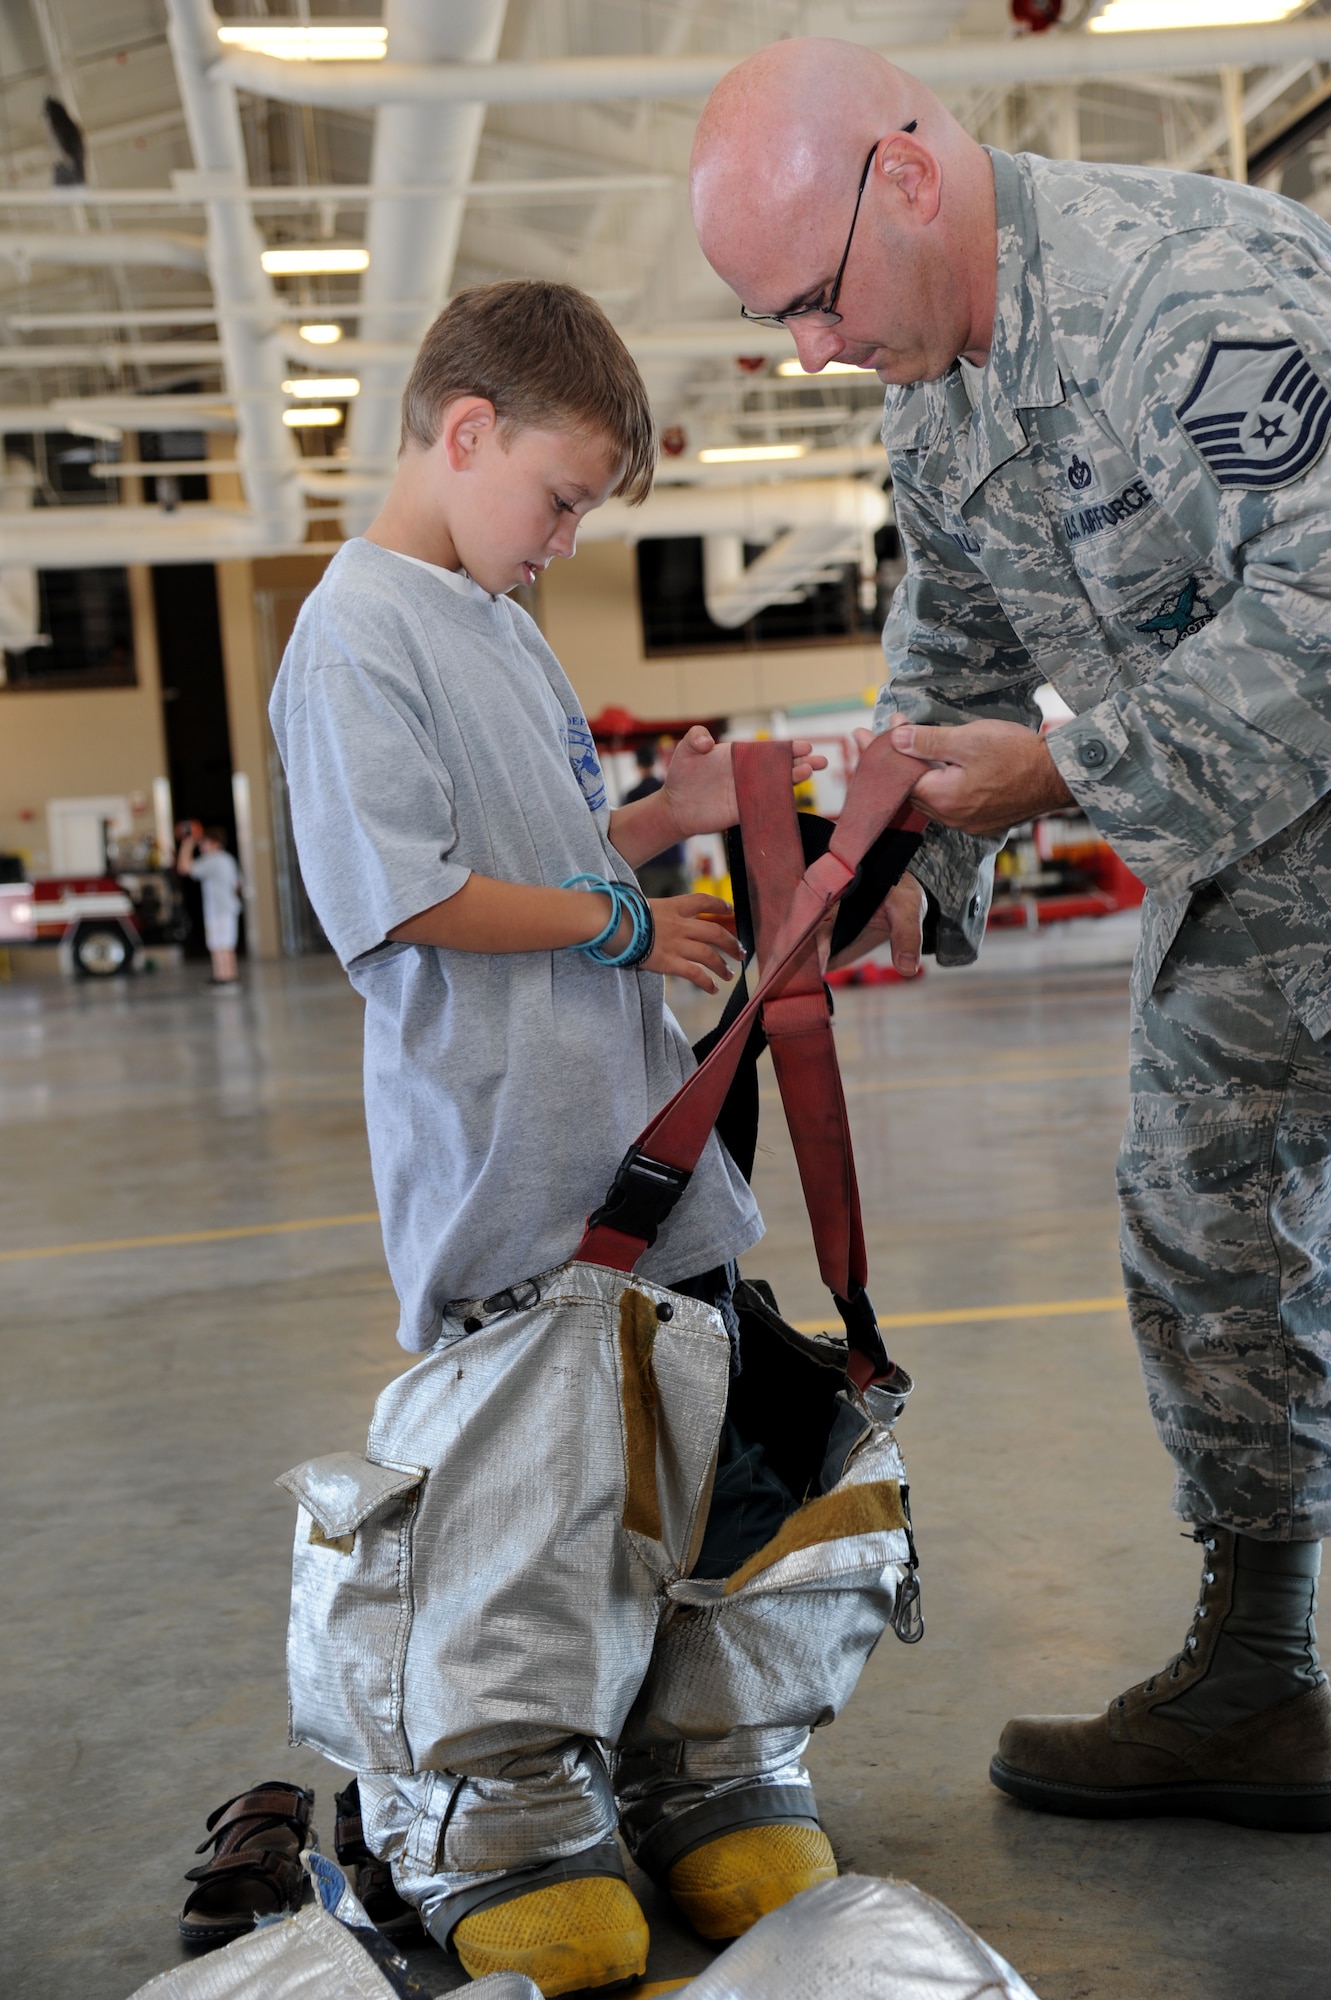 Kaleb Bullard, 8, receives assistance from his dad, Master Sgt. Jerame Bullard, Keesler firefighter, with putting on firefighter gear during the Keesler Fire Department’s open house Oct. 13, 2012, Keesler Air Force Base, Miss.  The event was held on the final day of fire prevention week during which the fire department conducted random fire drills throughout the base, toured various facilities with Sparky the Fire Dog, passed out fire safety handouts and fire hats for children and provided stove and fire extinguisher demonstrations.  (U.S. Air Force photo by Kemberly Groue)